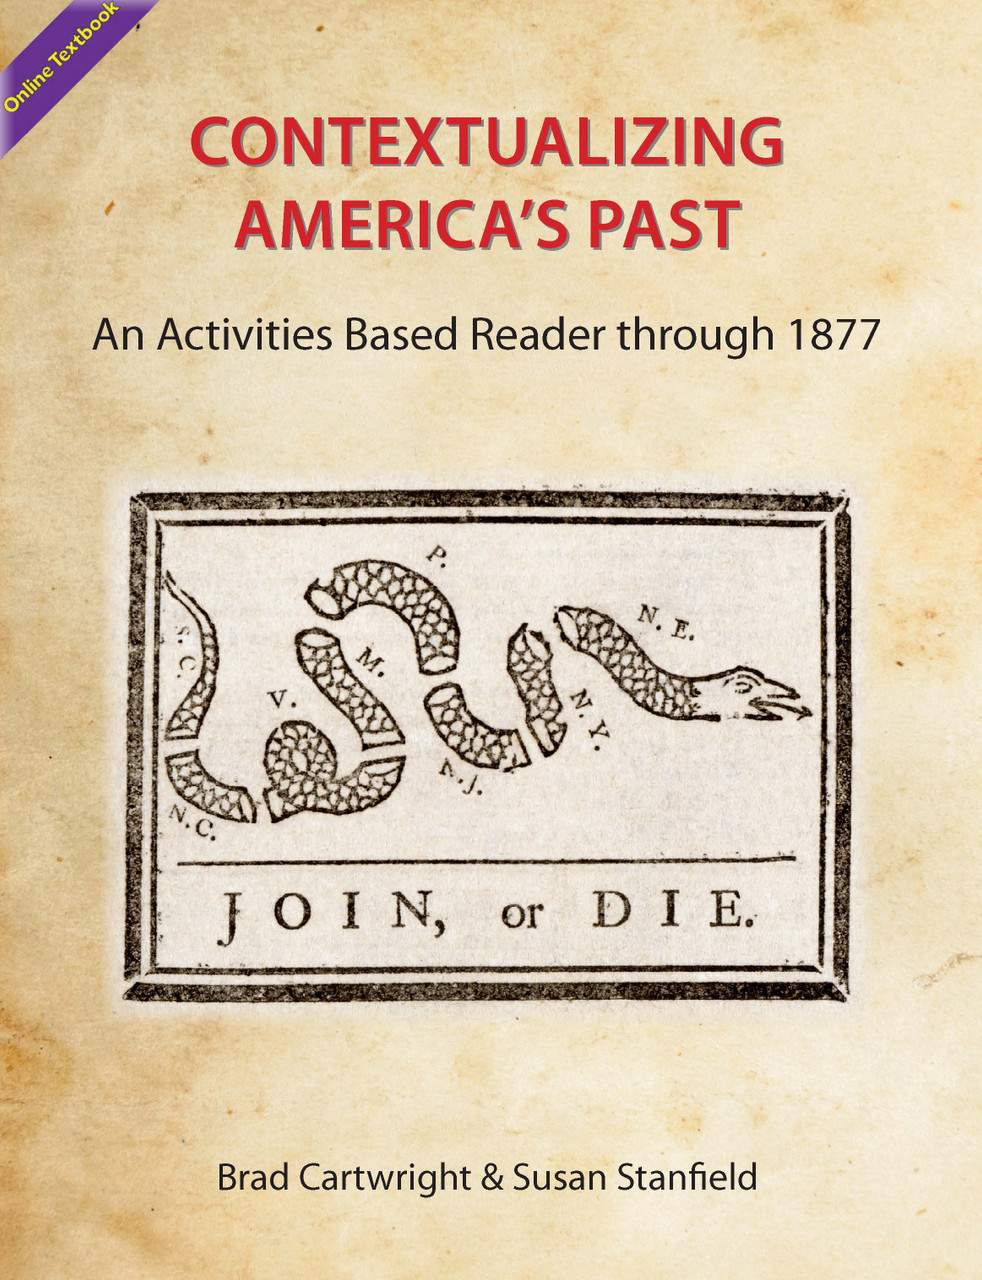 America's　(Cartwright　Sentia　Textbook　Stanfield)　Online　Past　Contextualizing　Publishing